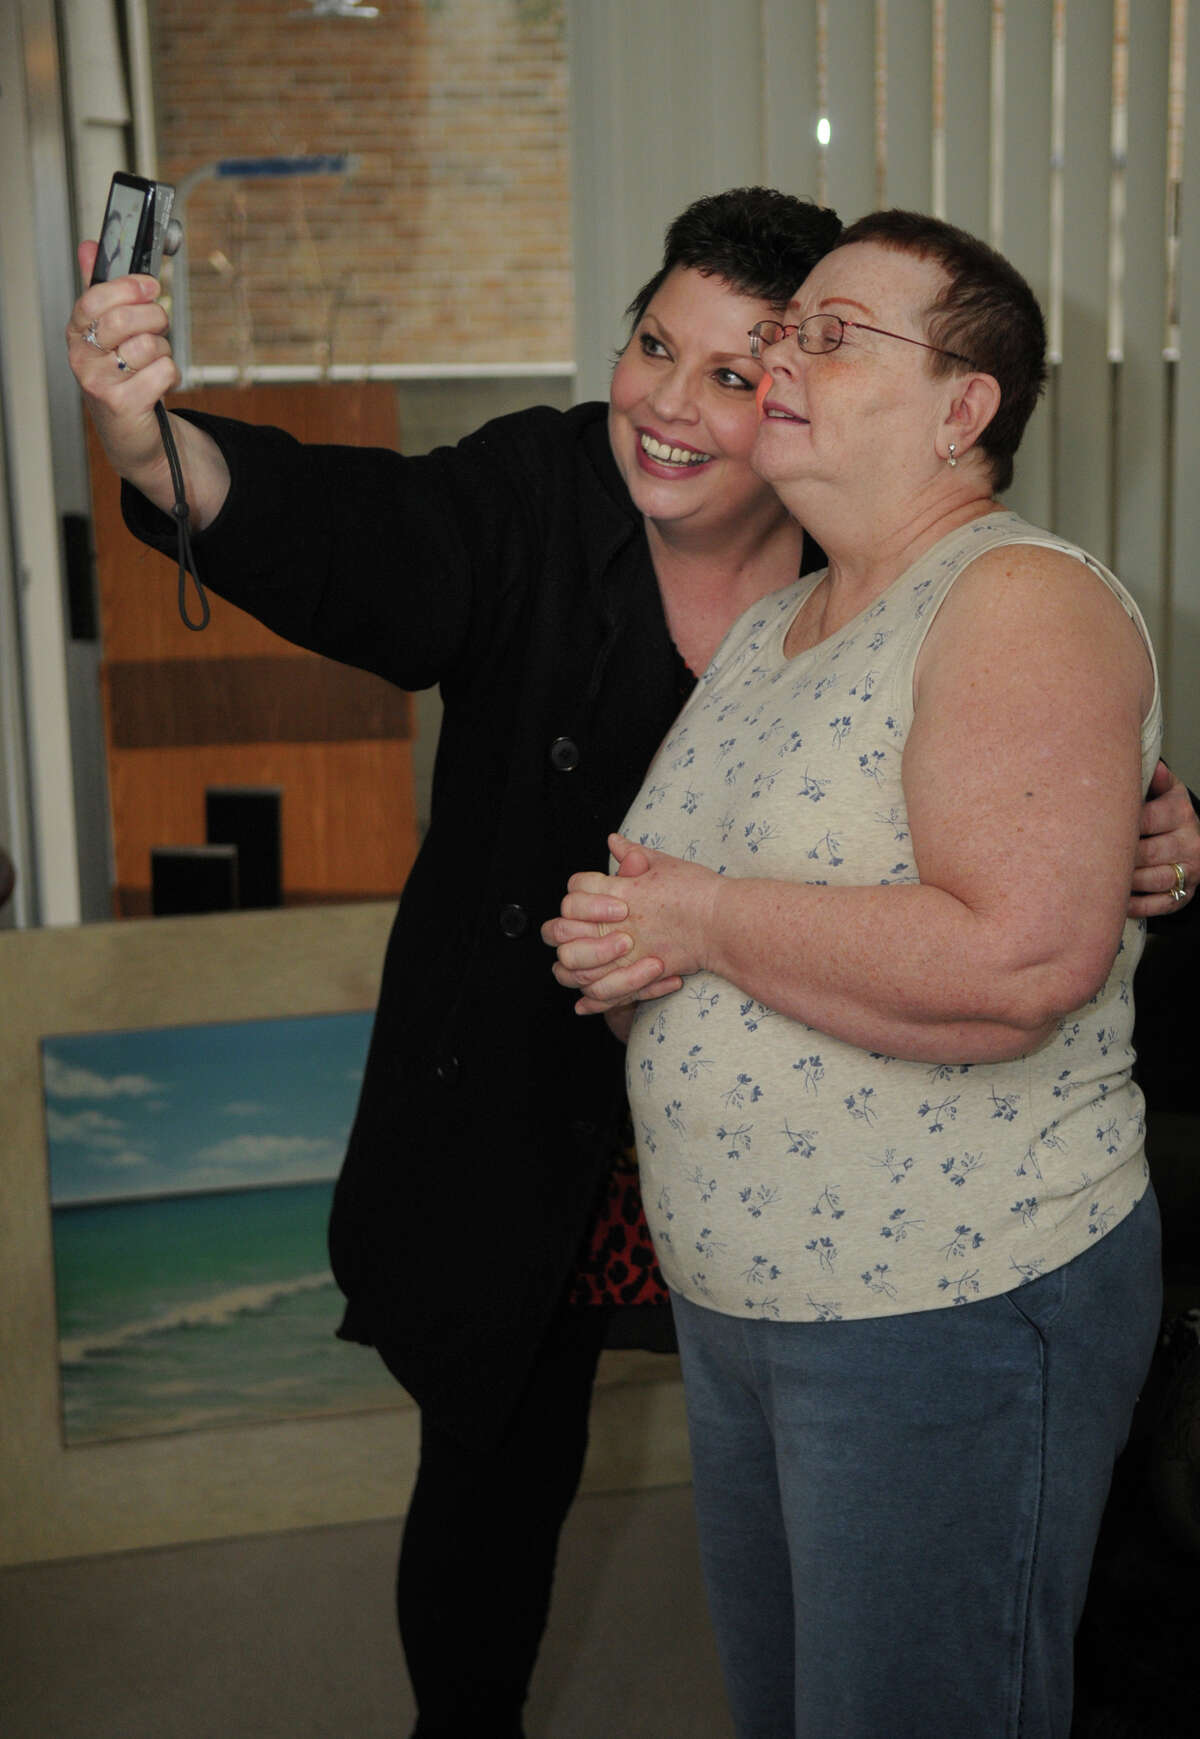 Kelly Quin, from left, takes a selfie with friend Karen Klaus, of The Woodlands, who was surprised with a houseful of furniture by Georgia Ann Spears of Gallery Furniture during their annual Christmas Giveaway on Friday.